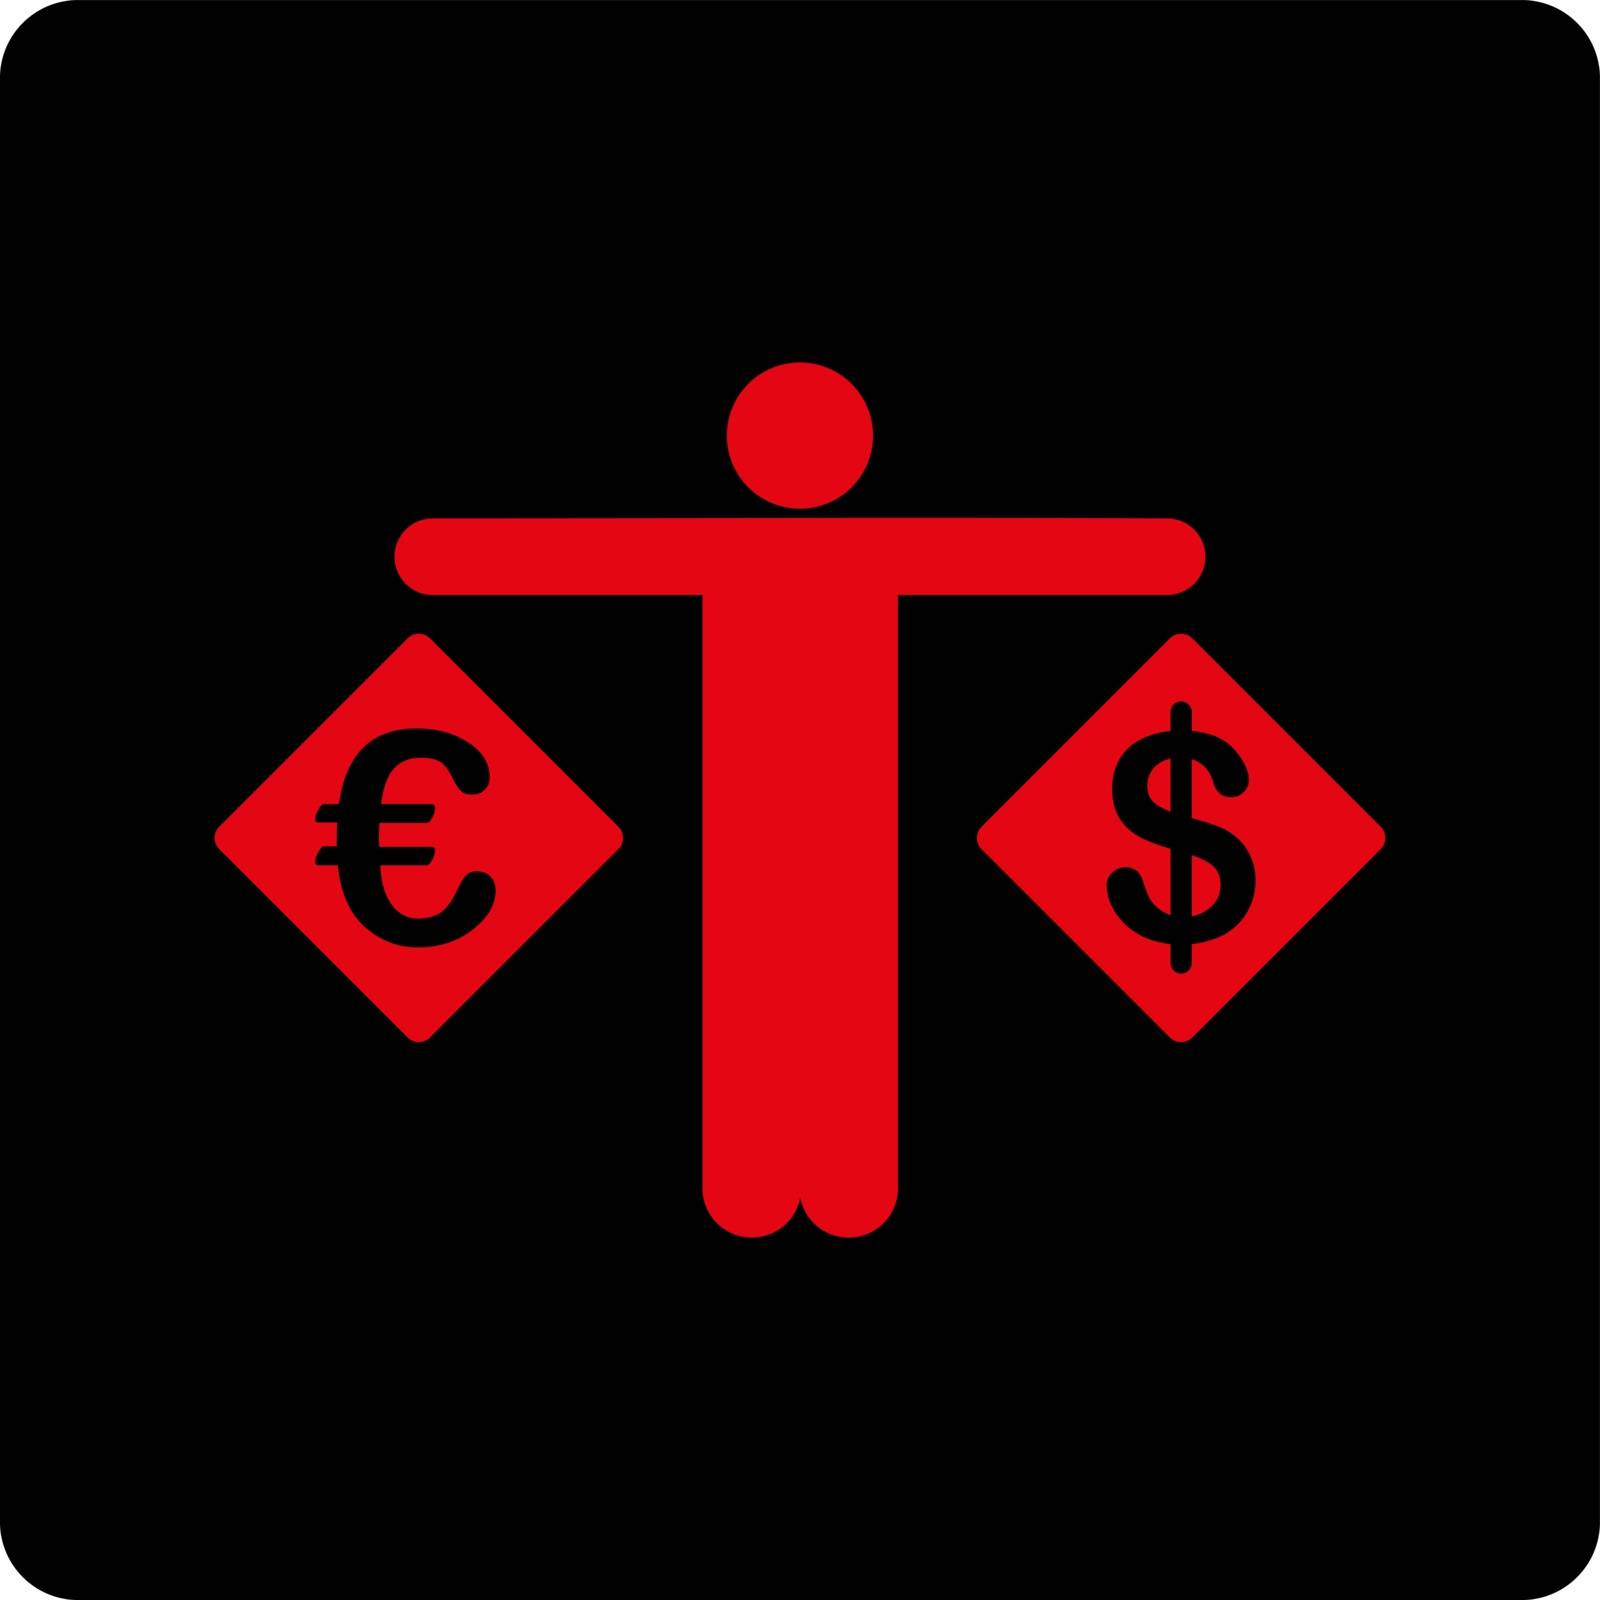 Currency compare icon by ahasoft